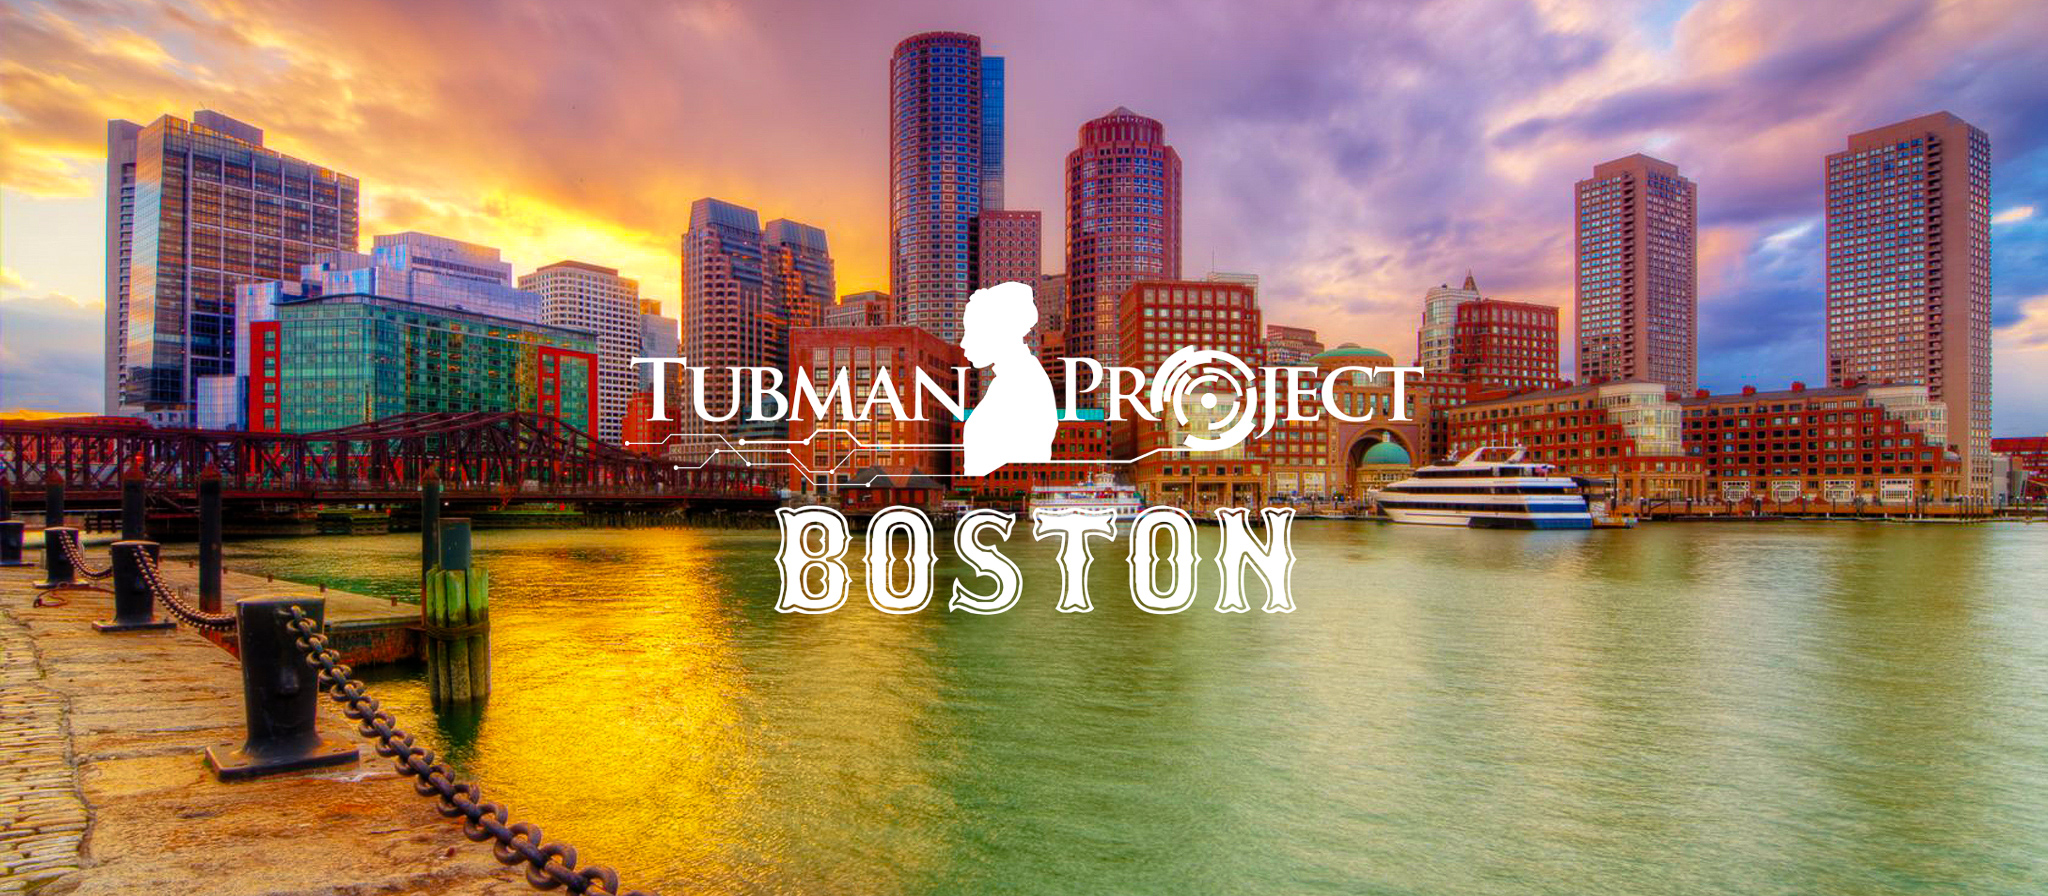 The Tubman Project